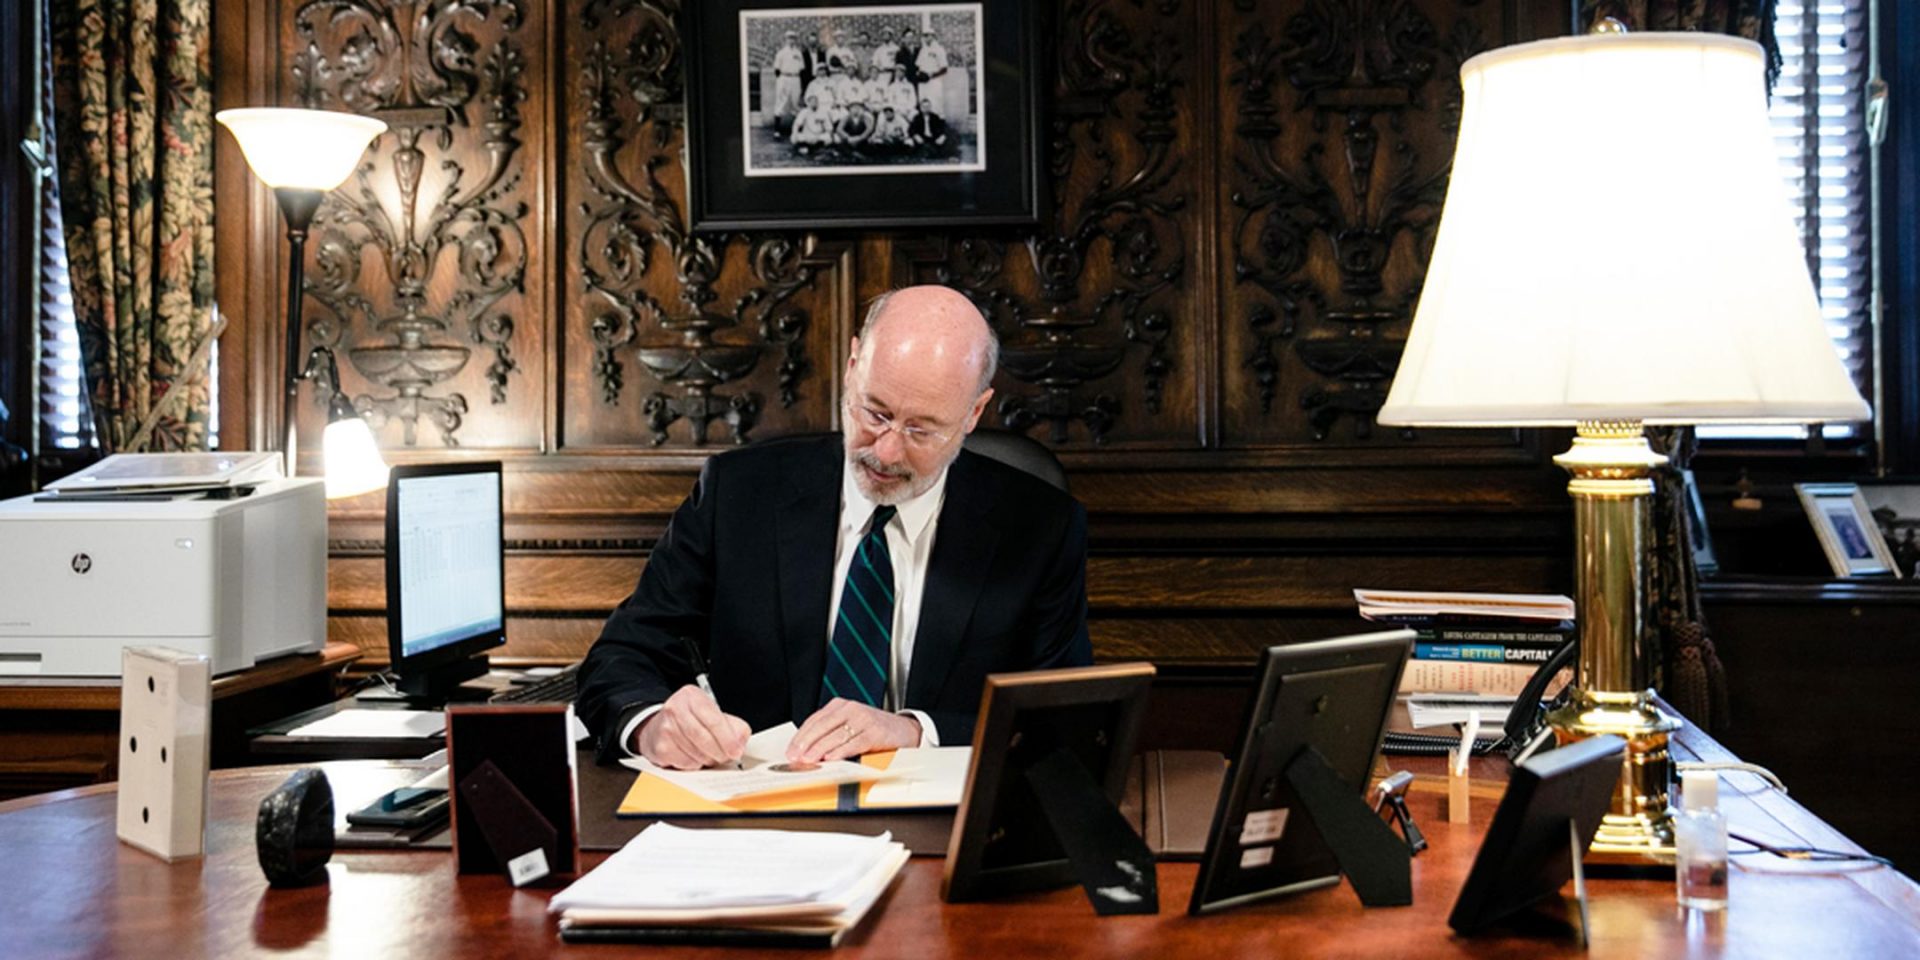 FILE PHOTO: Gov. Tom Wolf signs the coronavirus disaster declaration in this file photo from March 2020.